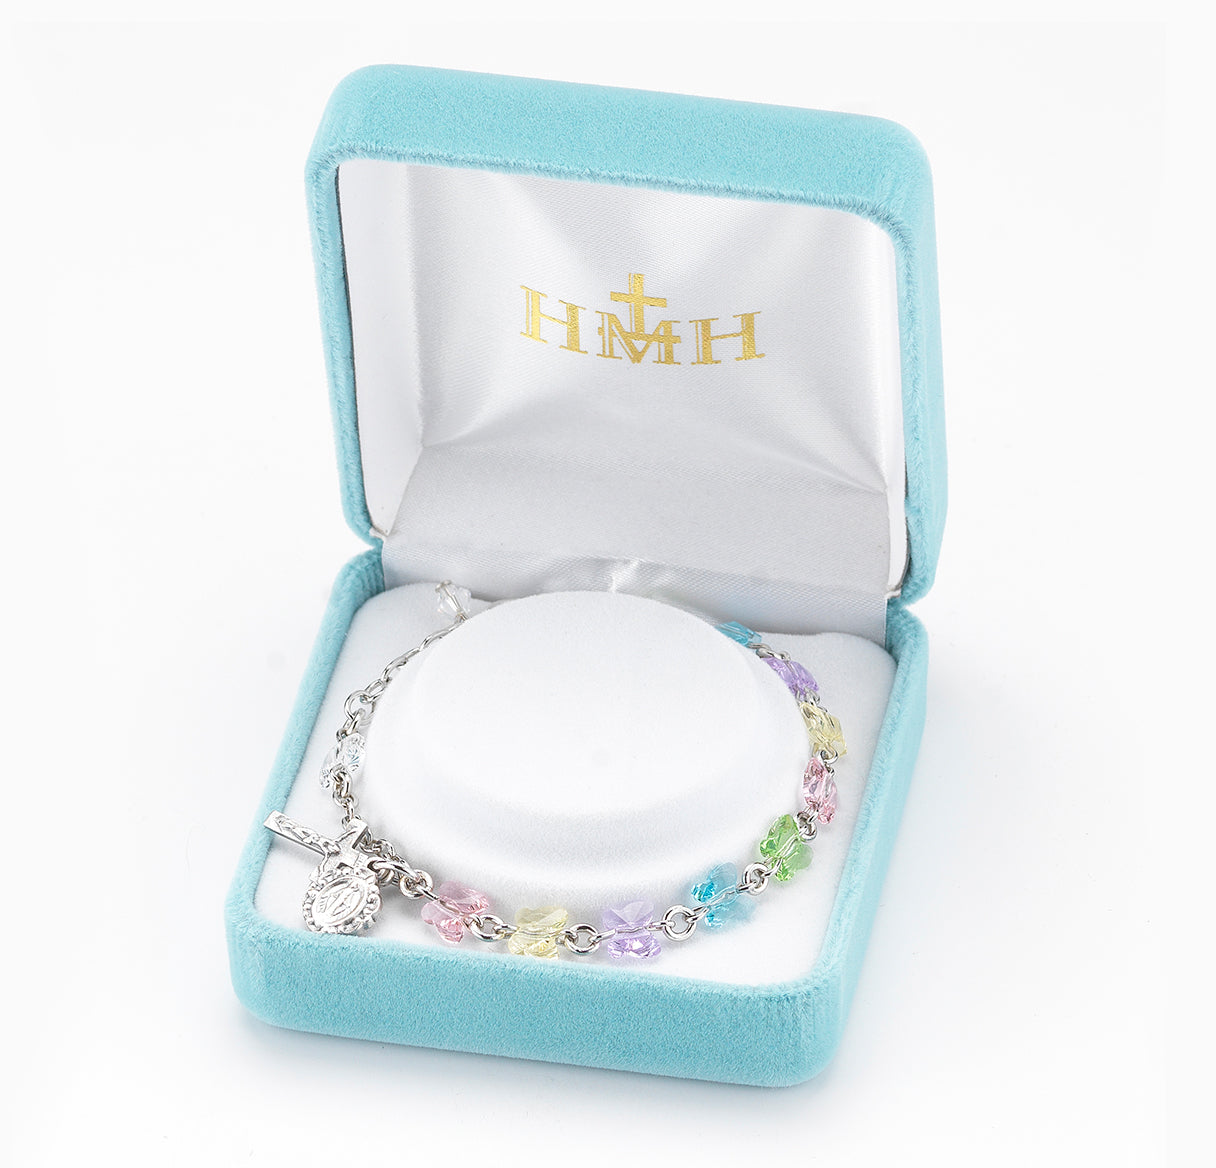 Butterfly Crystal Rosary Bracelet Created with 6mm Swarovski Crystal Multi-Colored Butterfly Beads by HMH